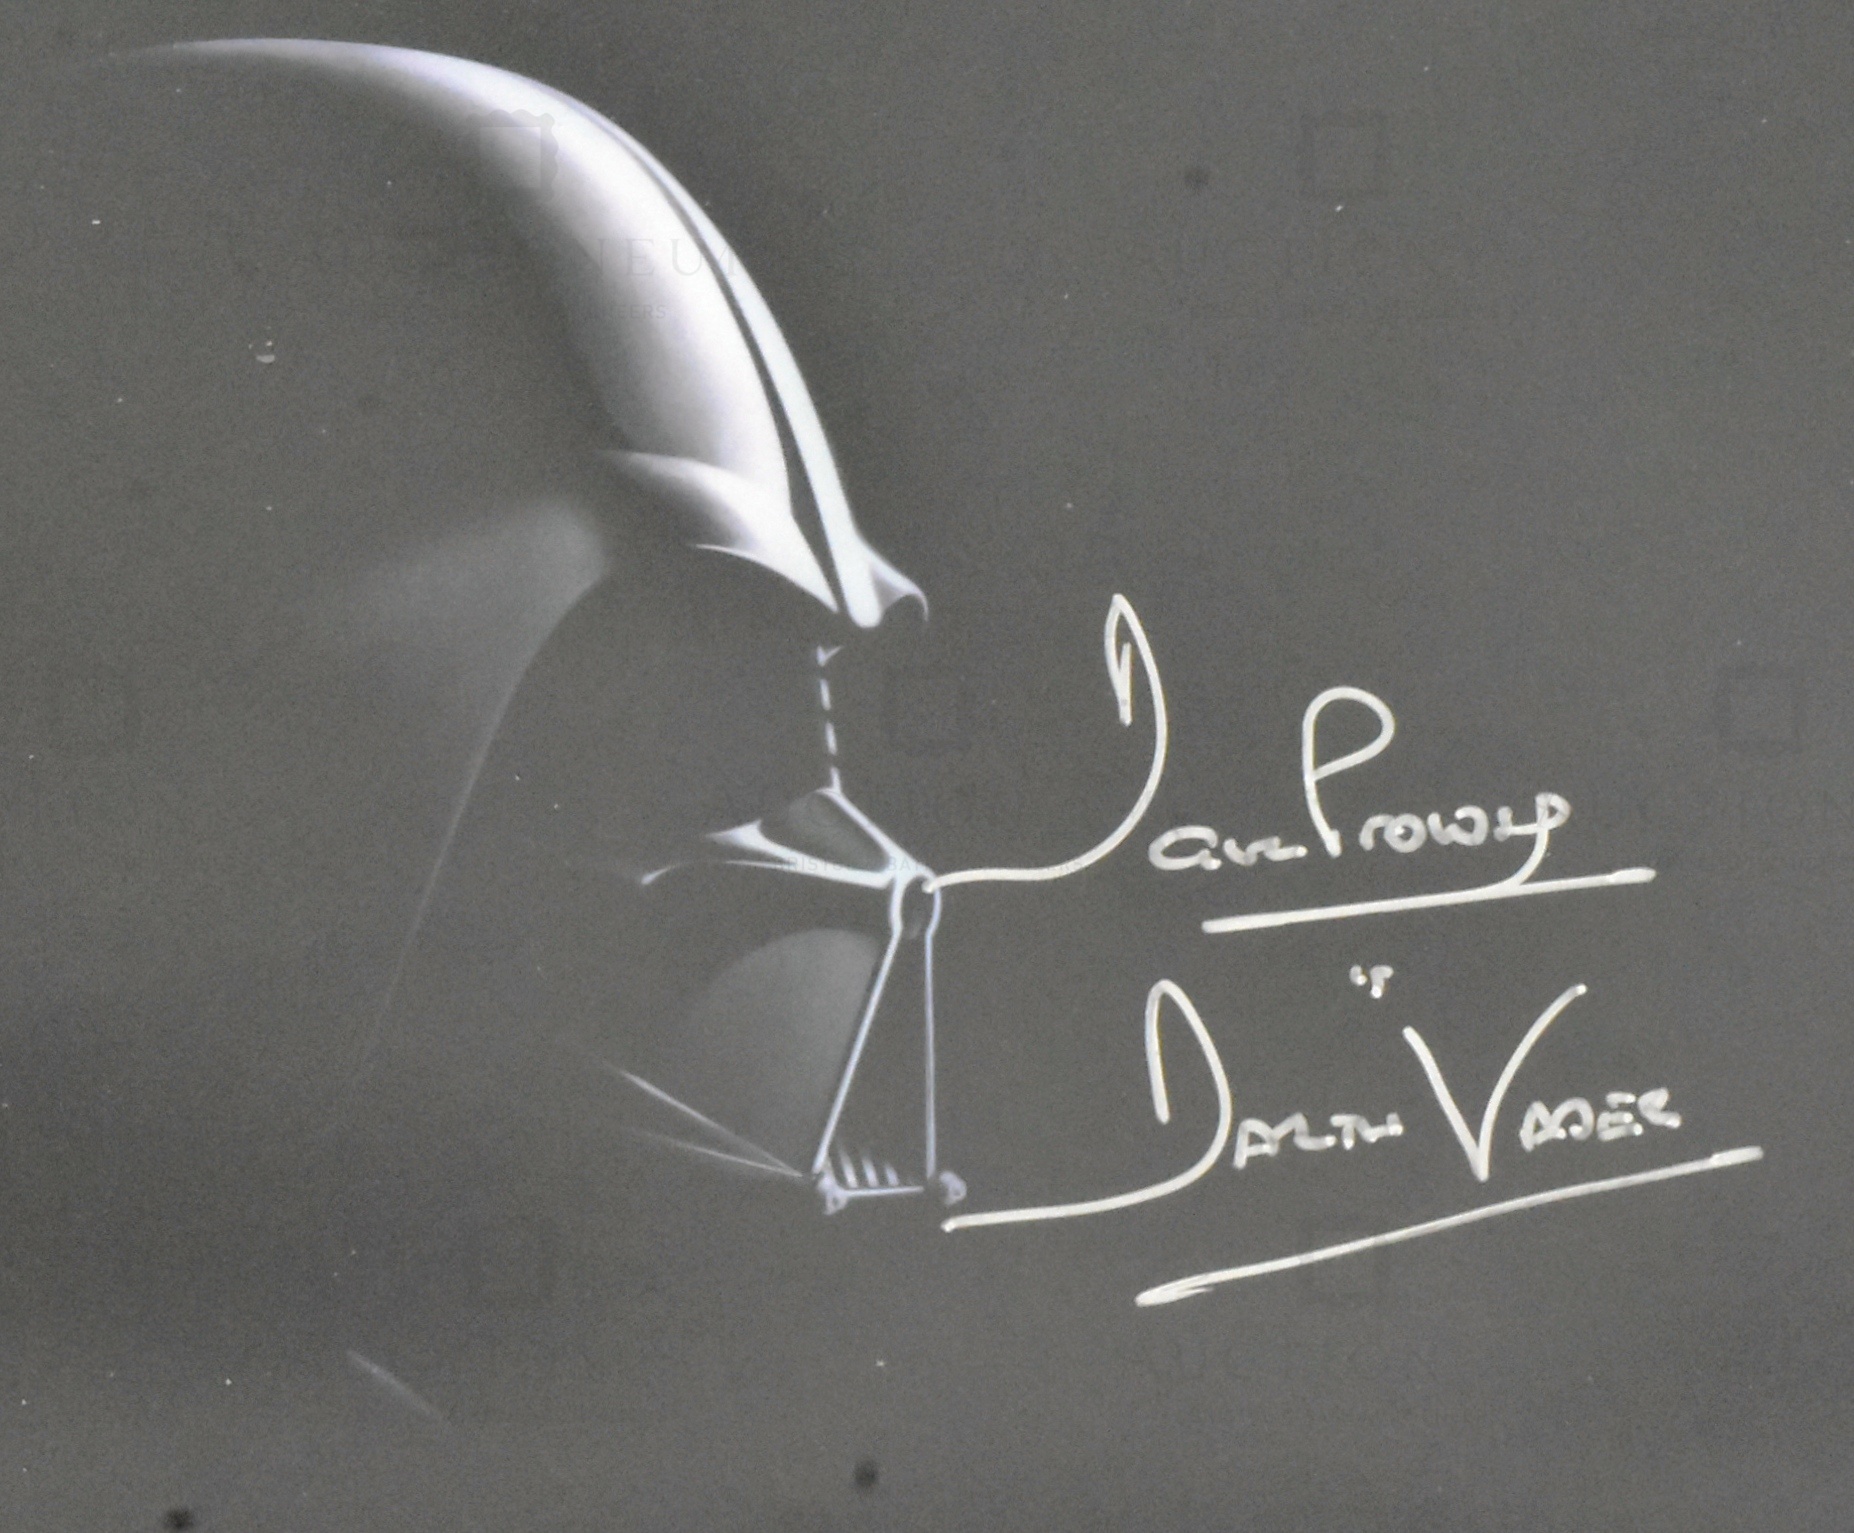 STAR WARS - DAVE PROWSE DARTH VADER - SIGNED 8X10" - Image 4 of 4